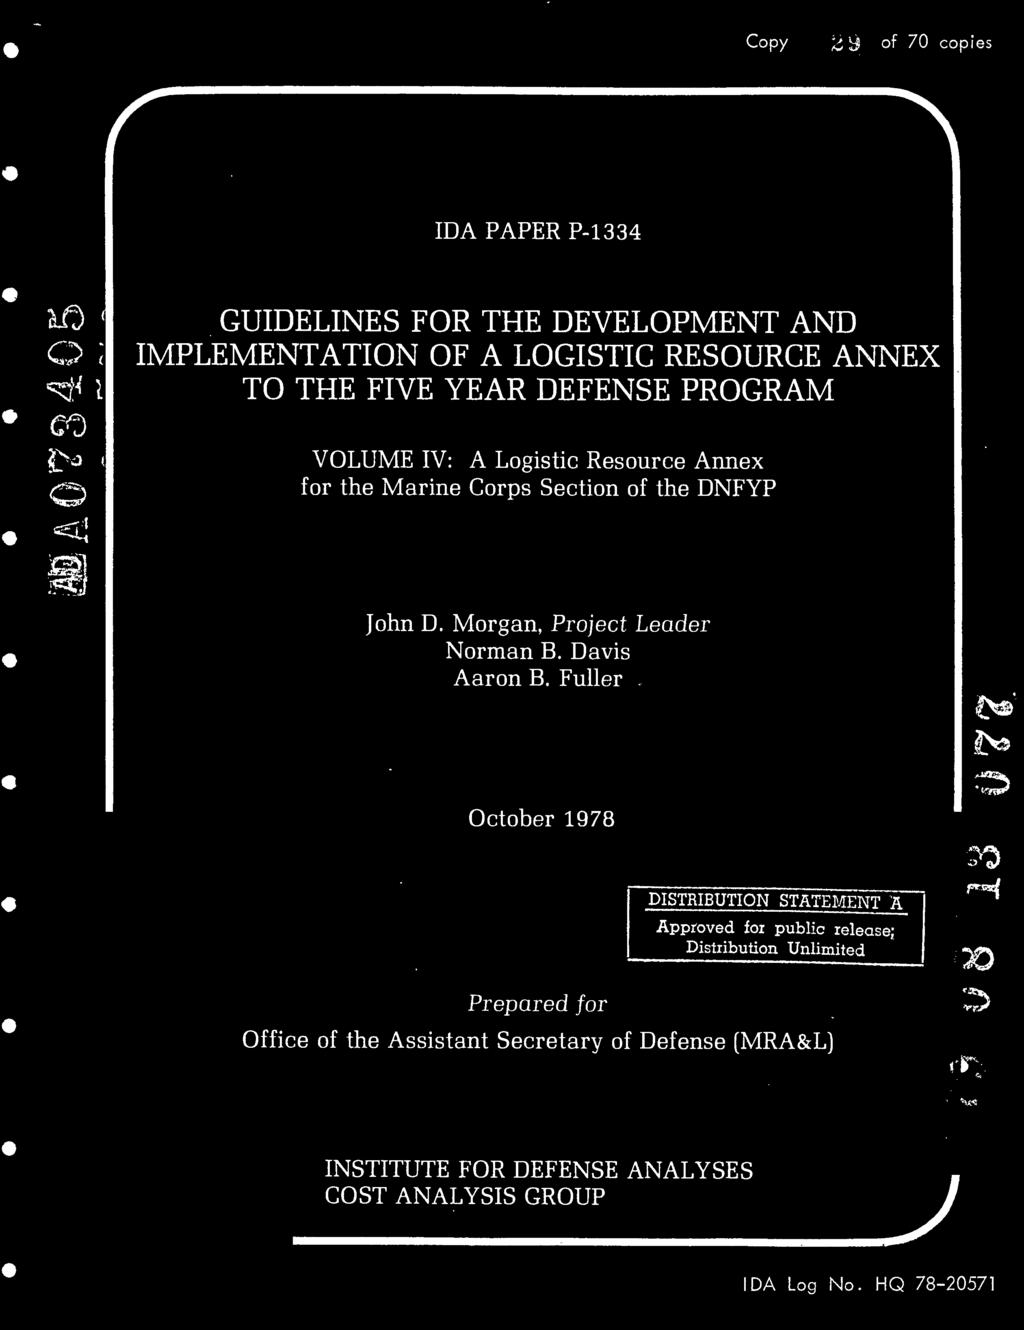 Fuller October 1978 Prepared for DISTRIBUTION STATEMENT A Approved foi public release;